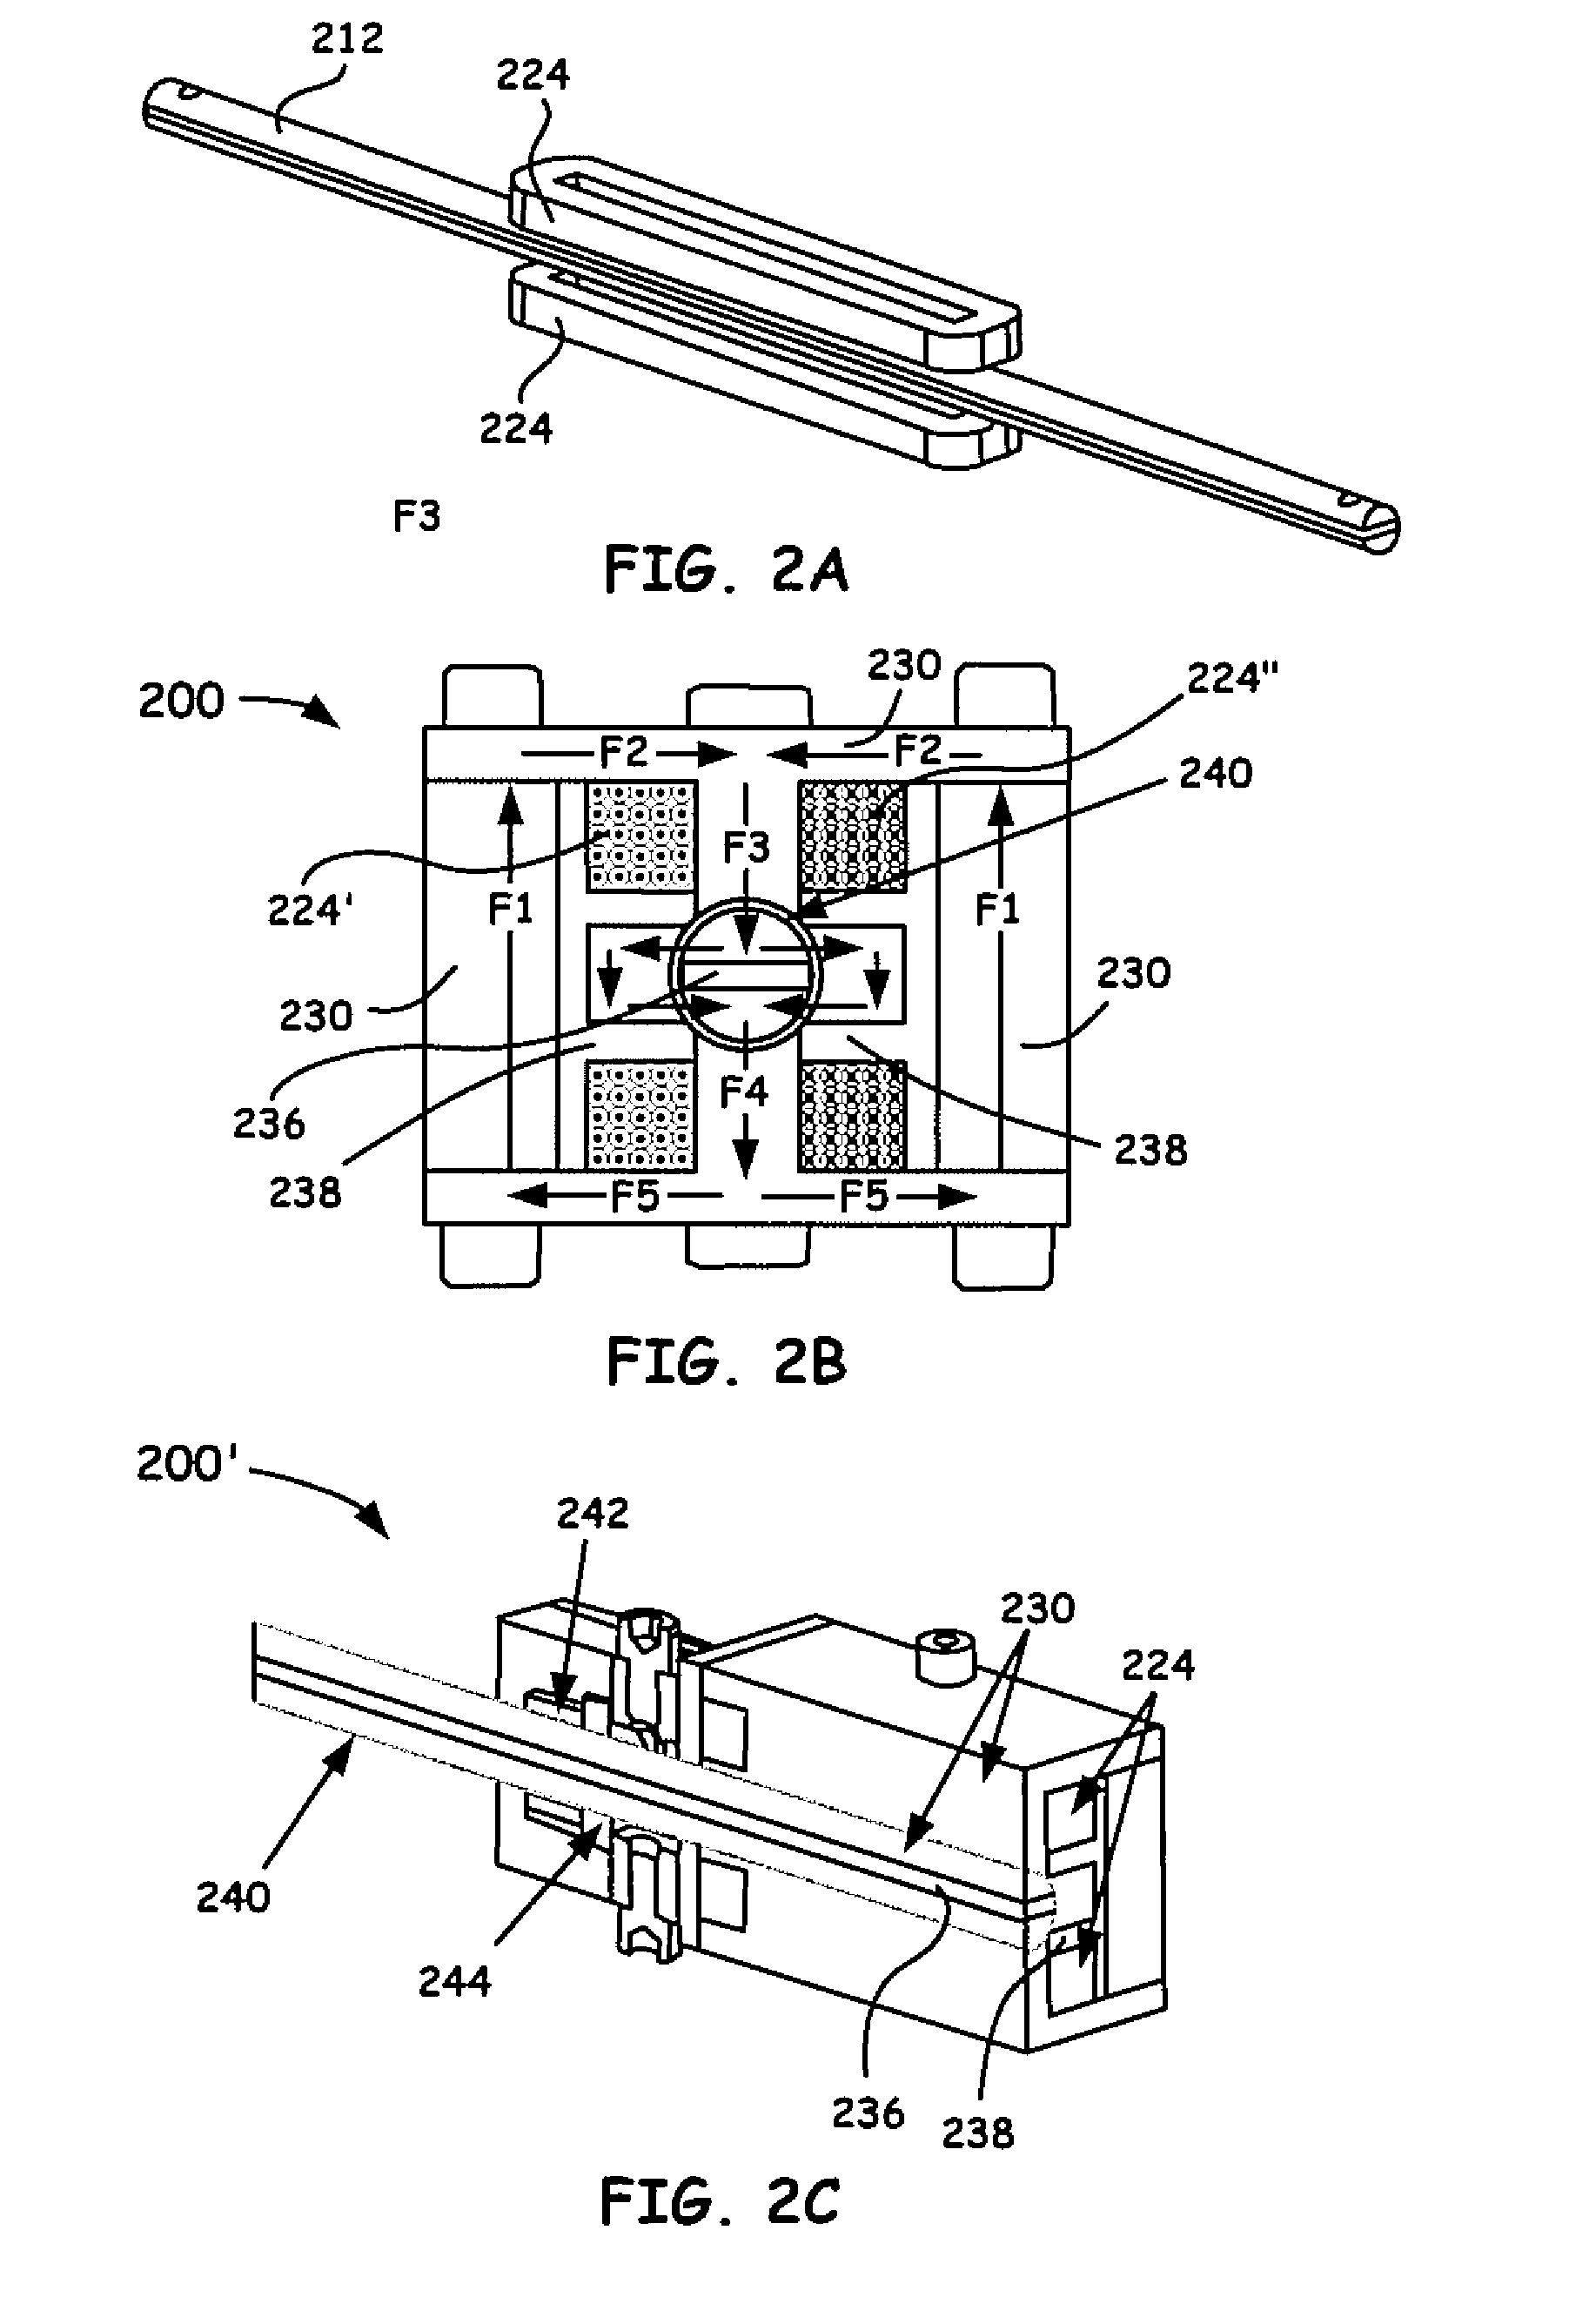 Linear mr-brake as a high force and low off-state friction actuator